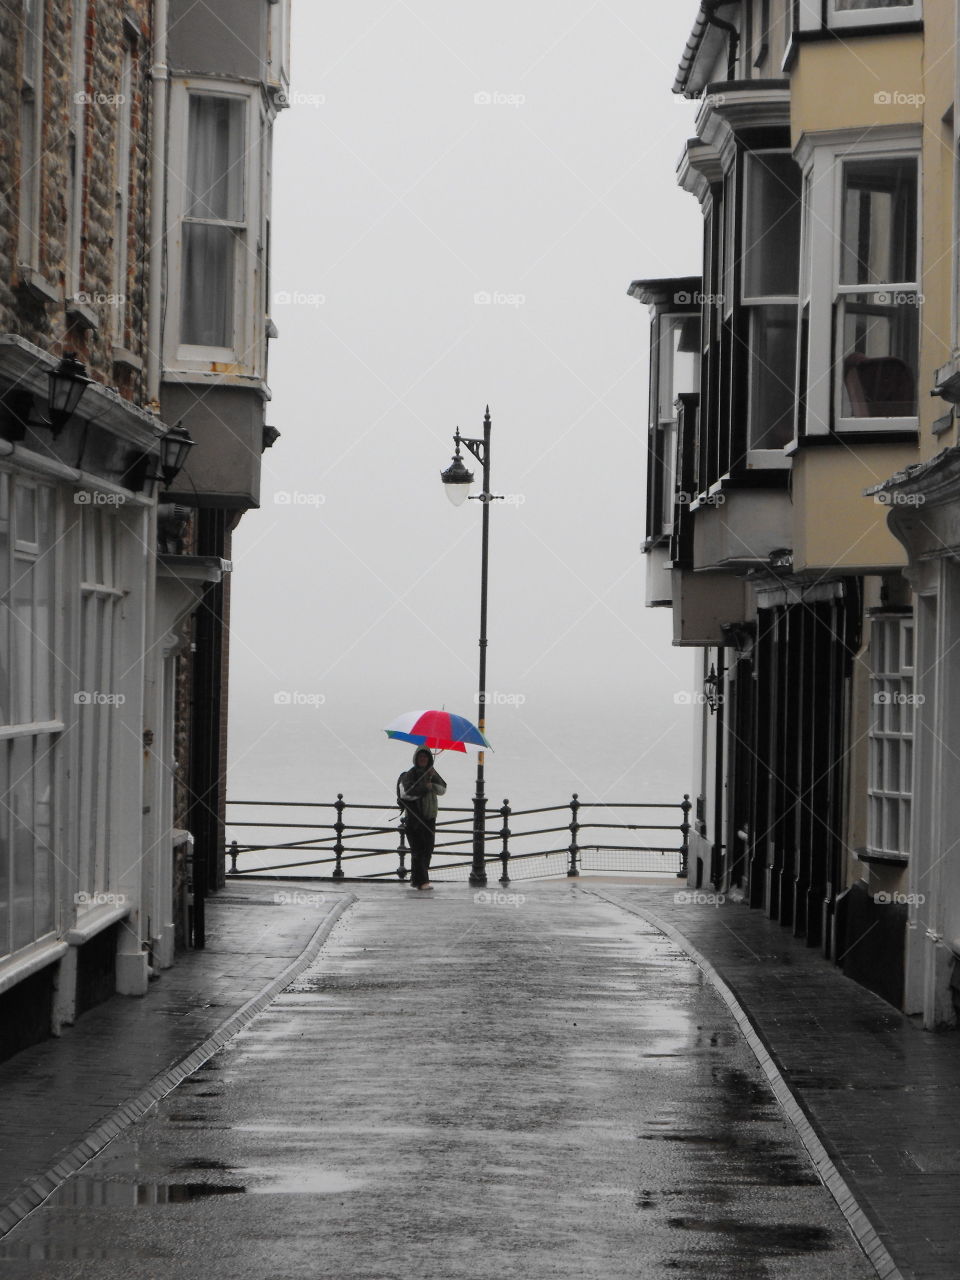 A man with a colorful umbrella by the sea